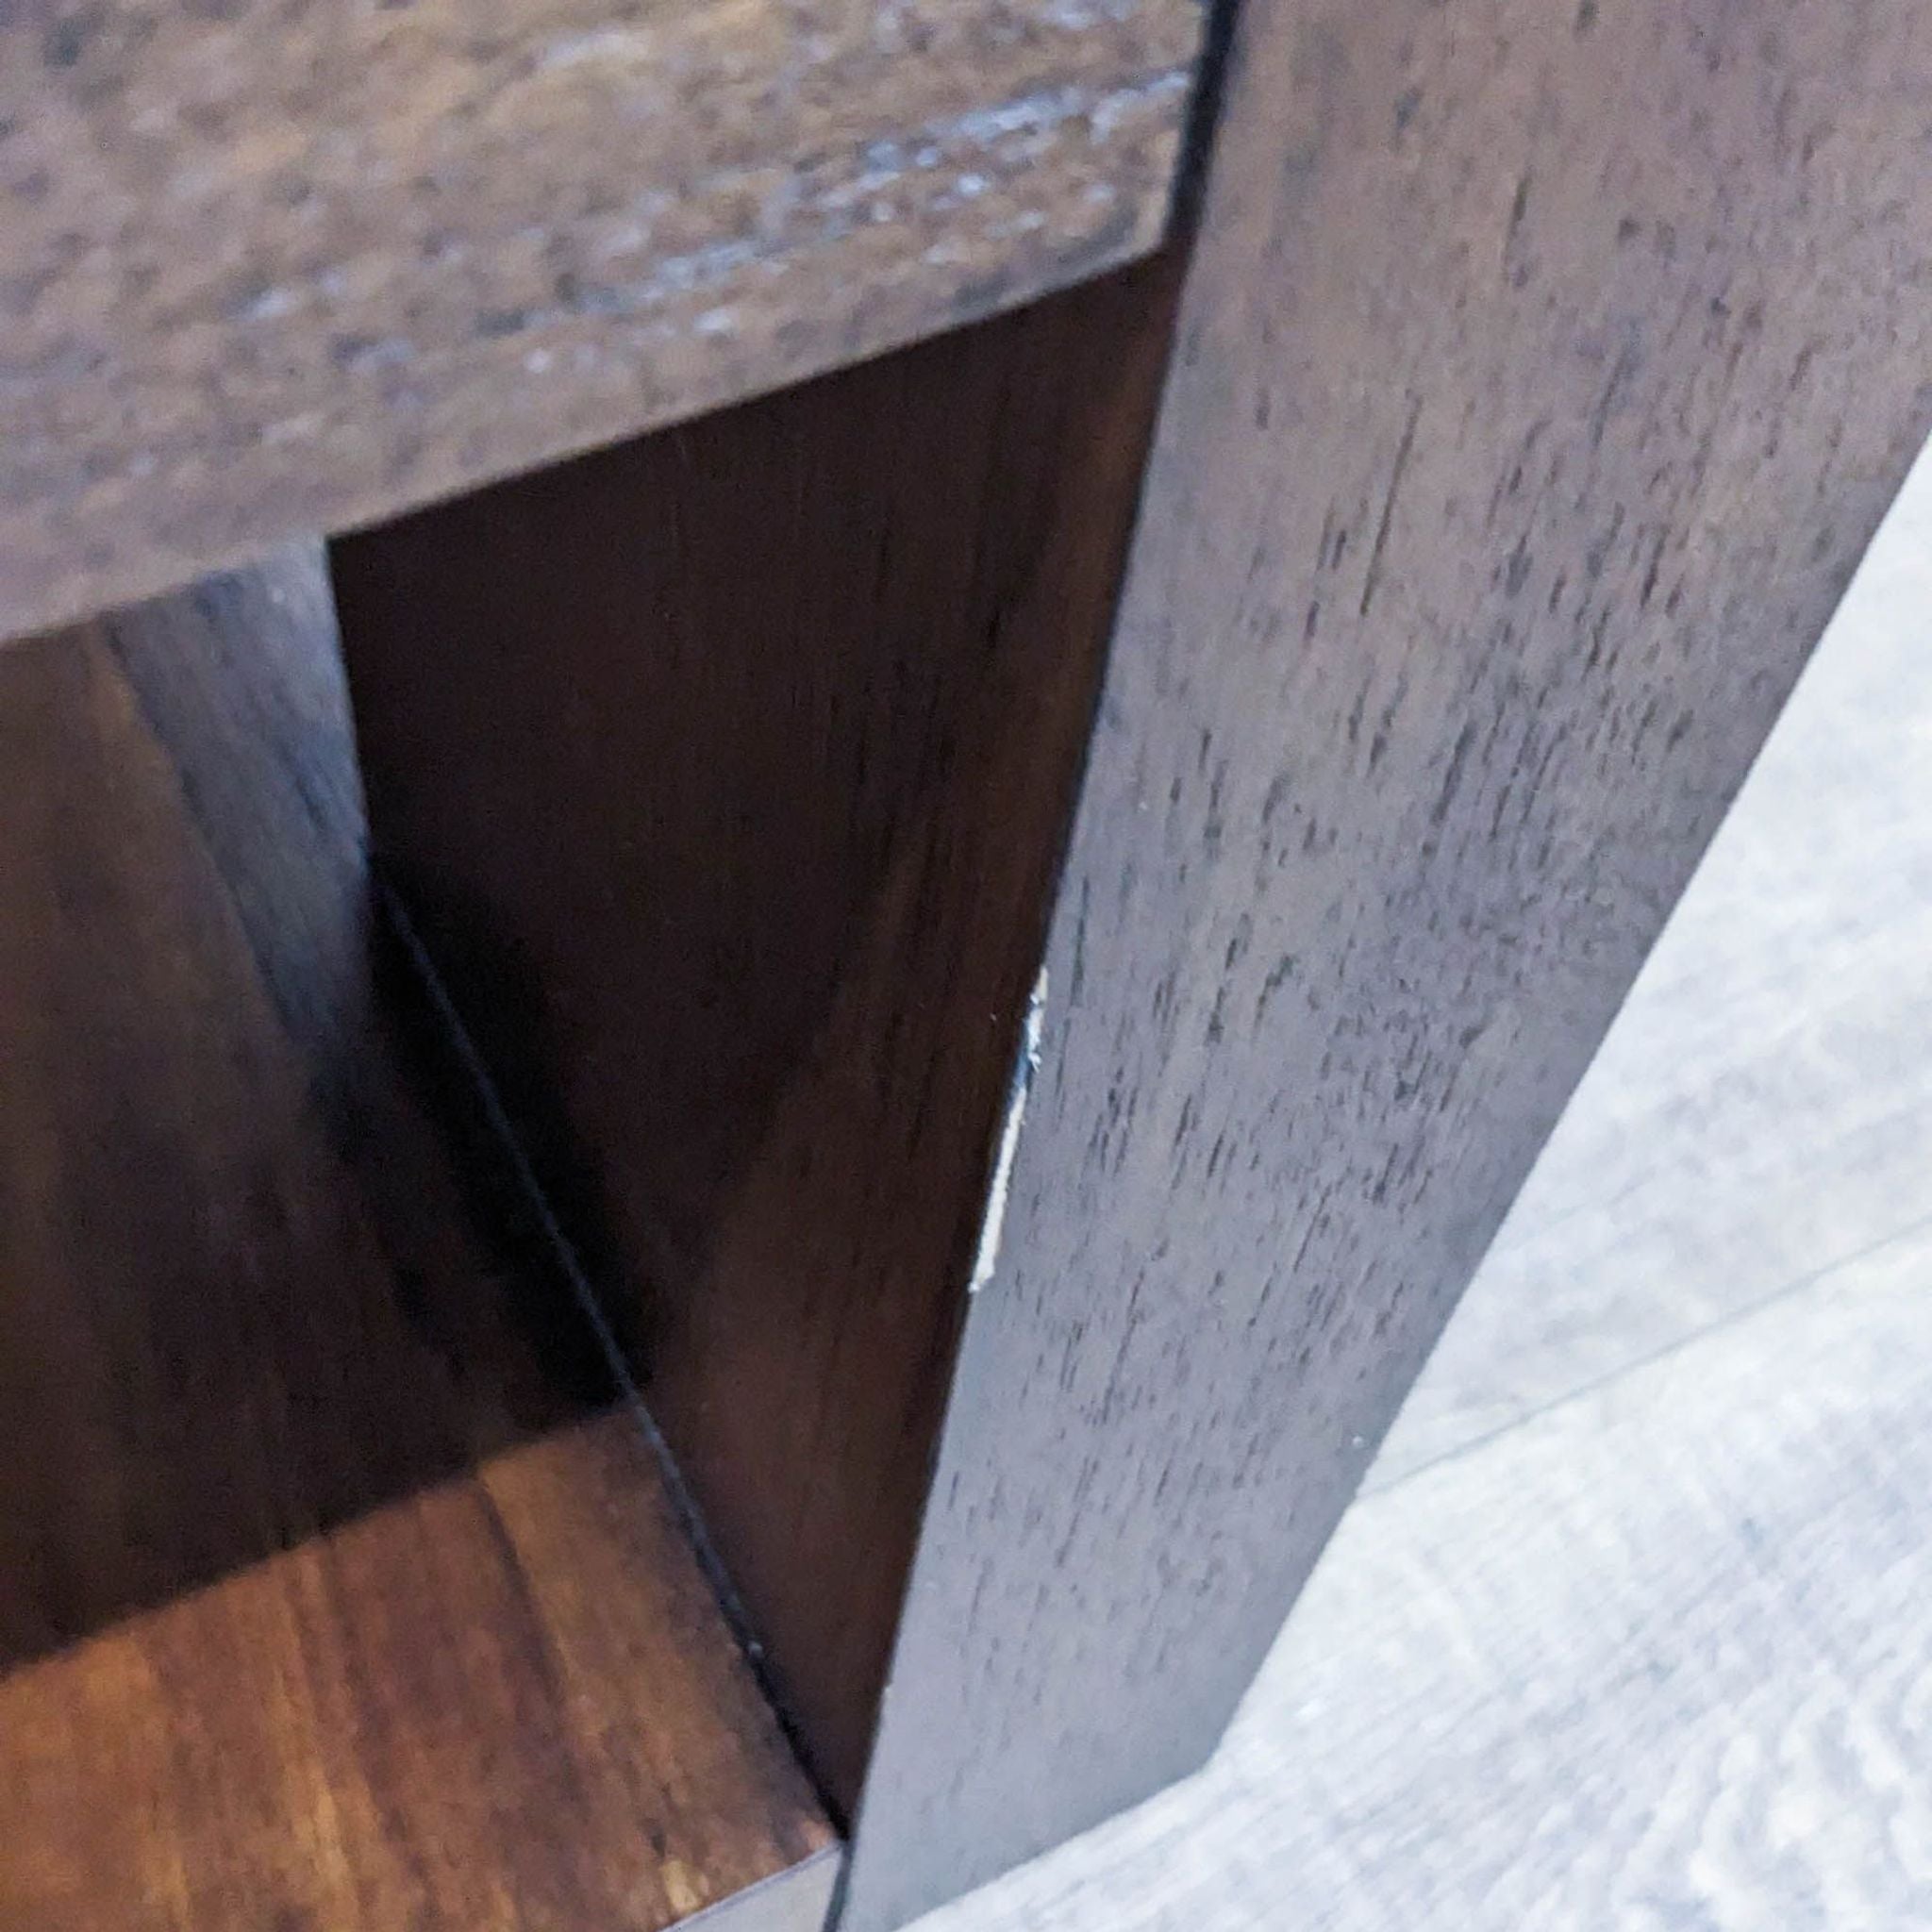 Close-up of Crate & Barrel coffee table corner showing the textured surface and recessed leg structure.